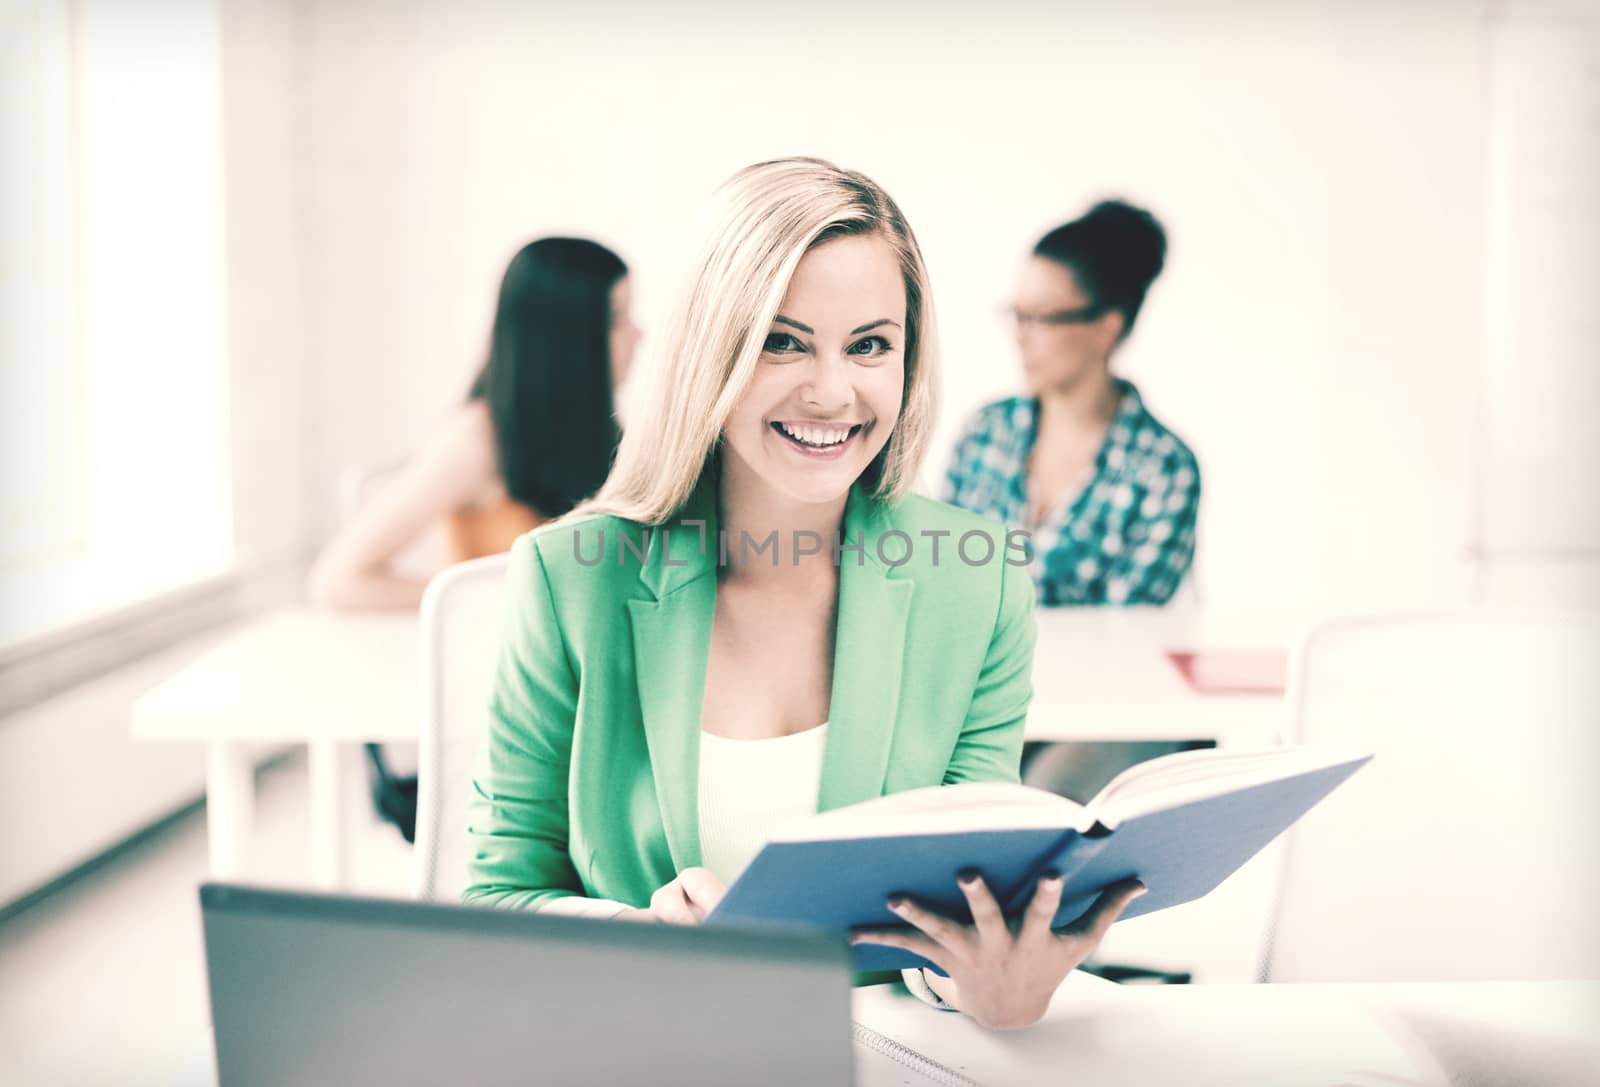 education concept - smiling young girl reading book at school